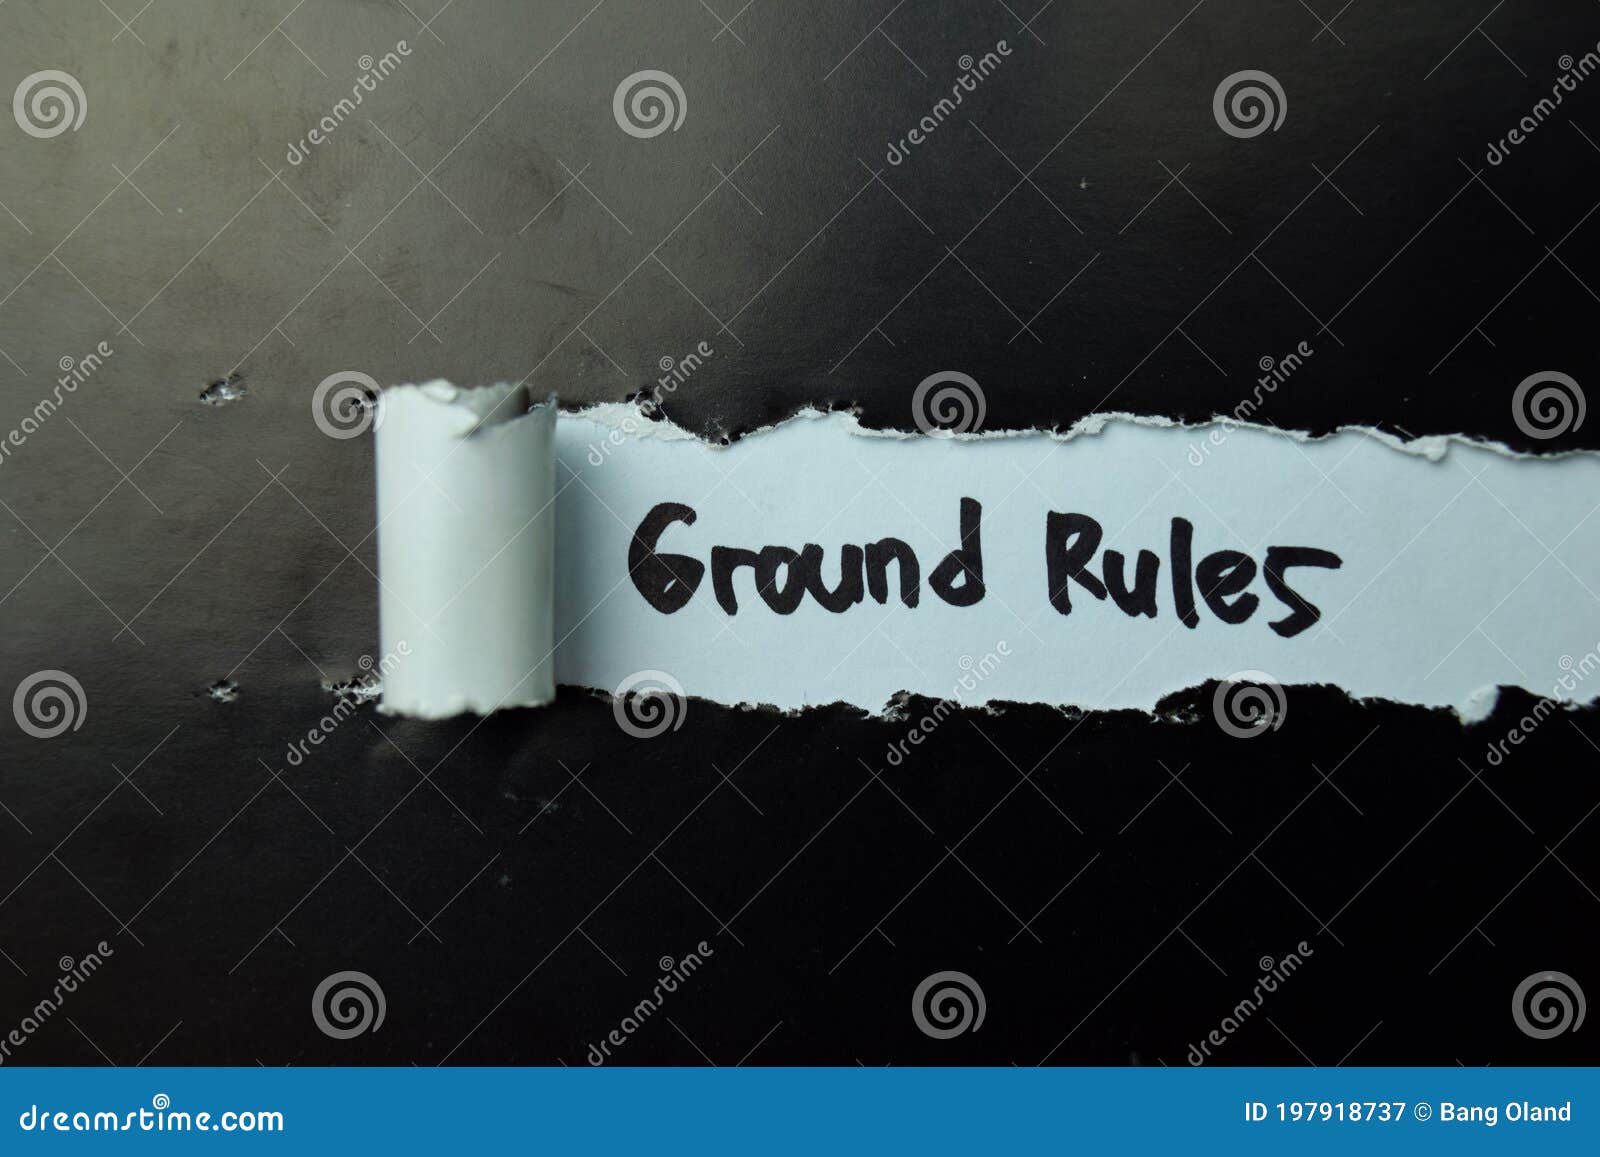 ground rules text written in torn paper